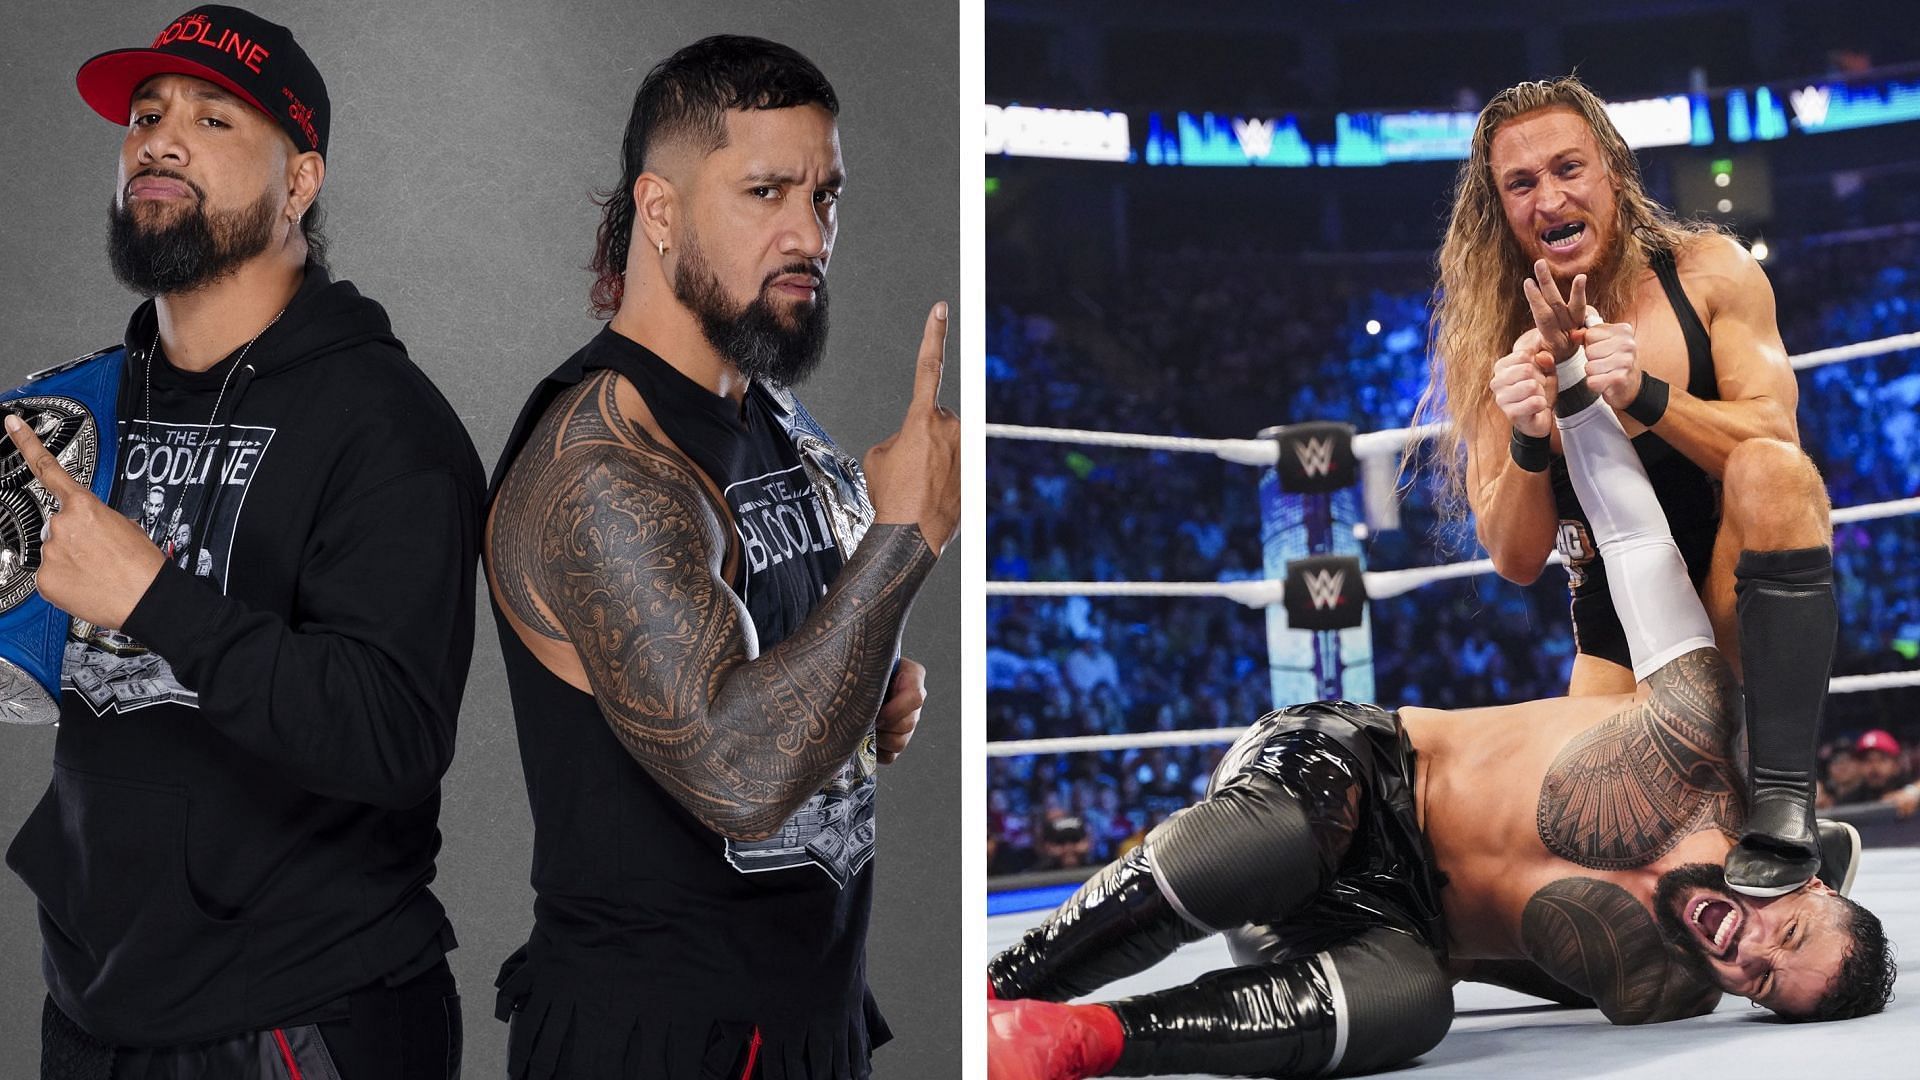 The Usos may need new challengers following the events of WWE SmackDown